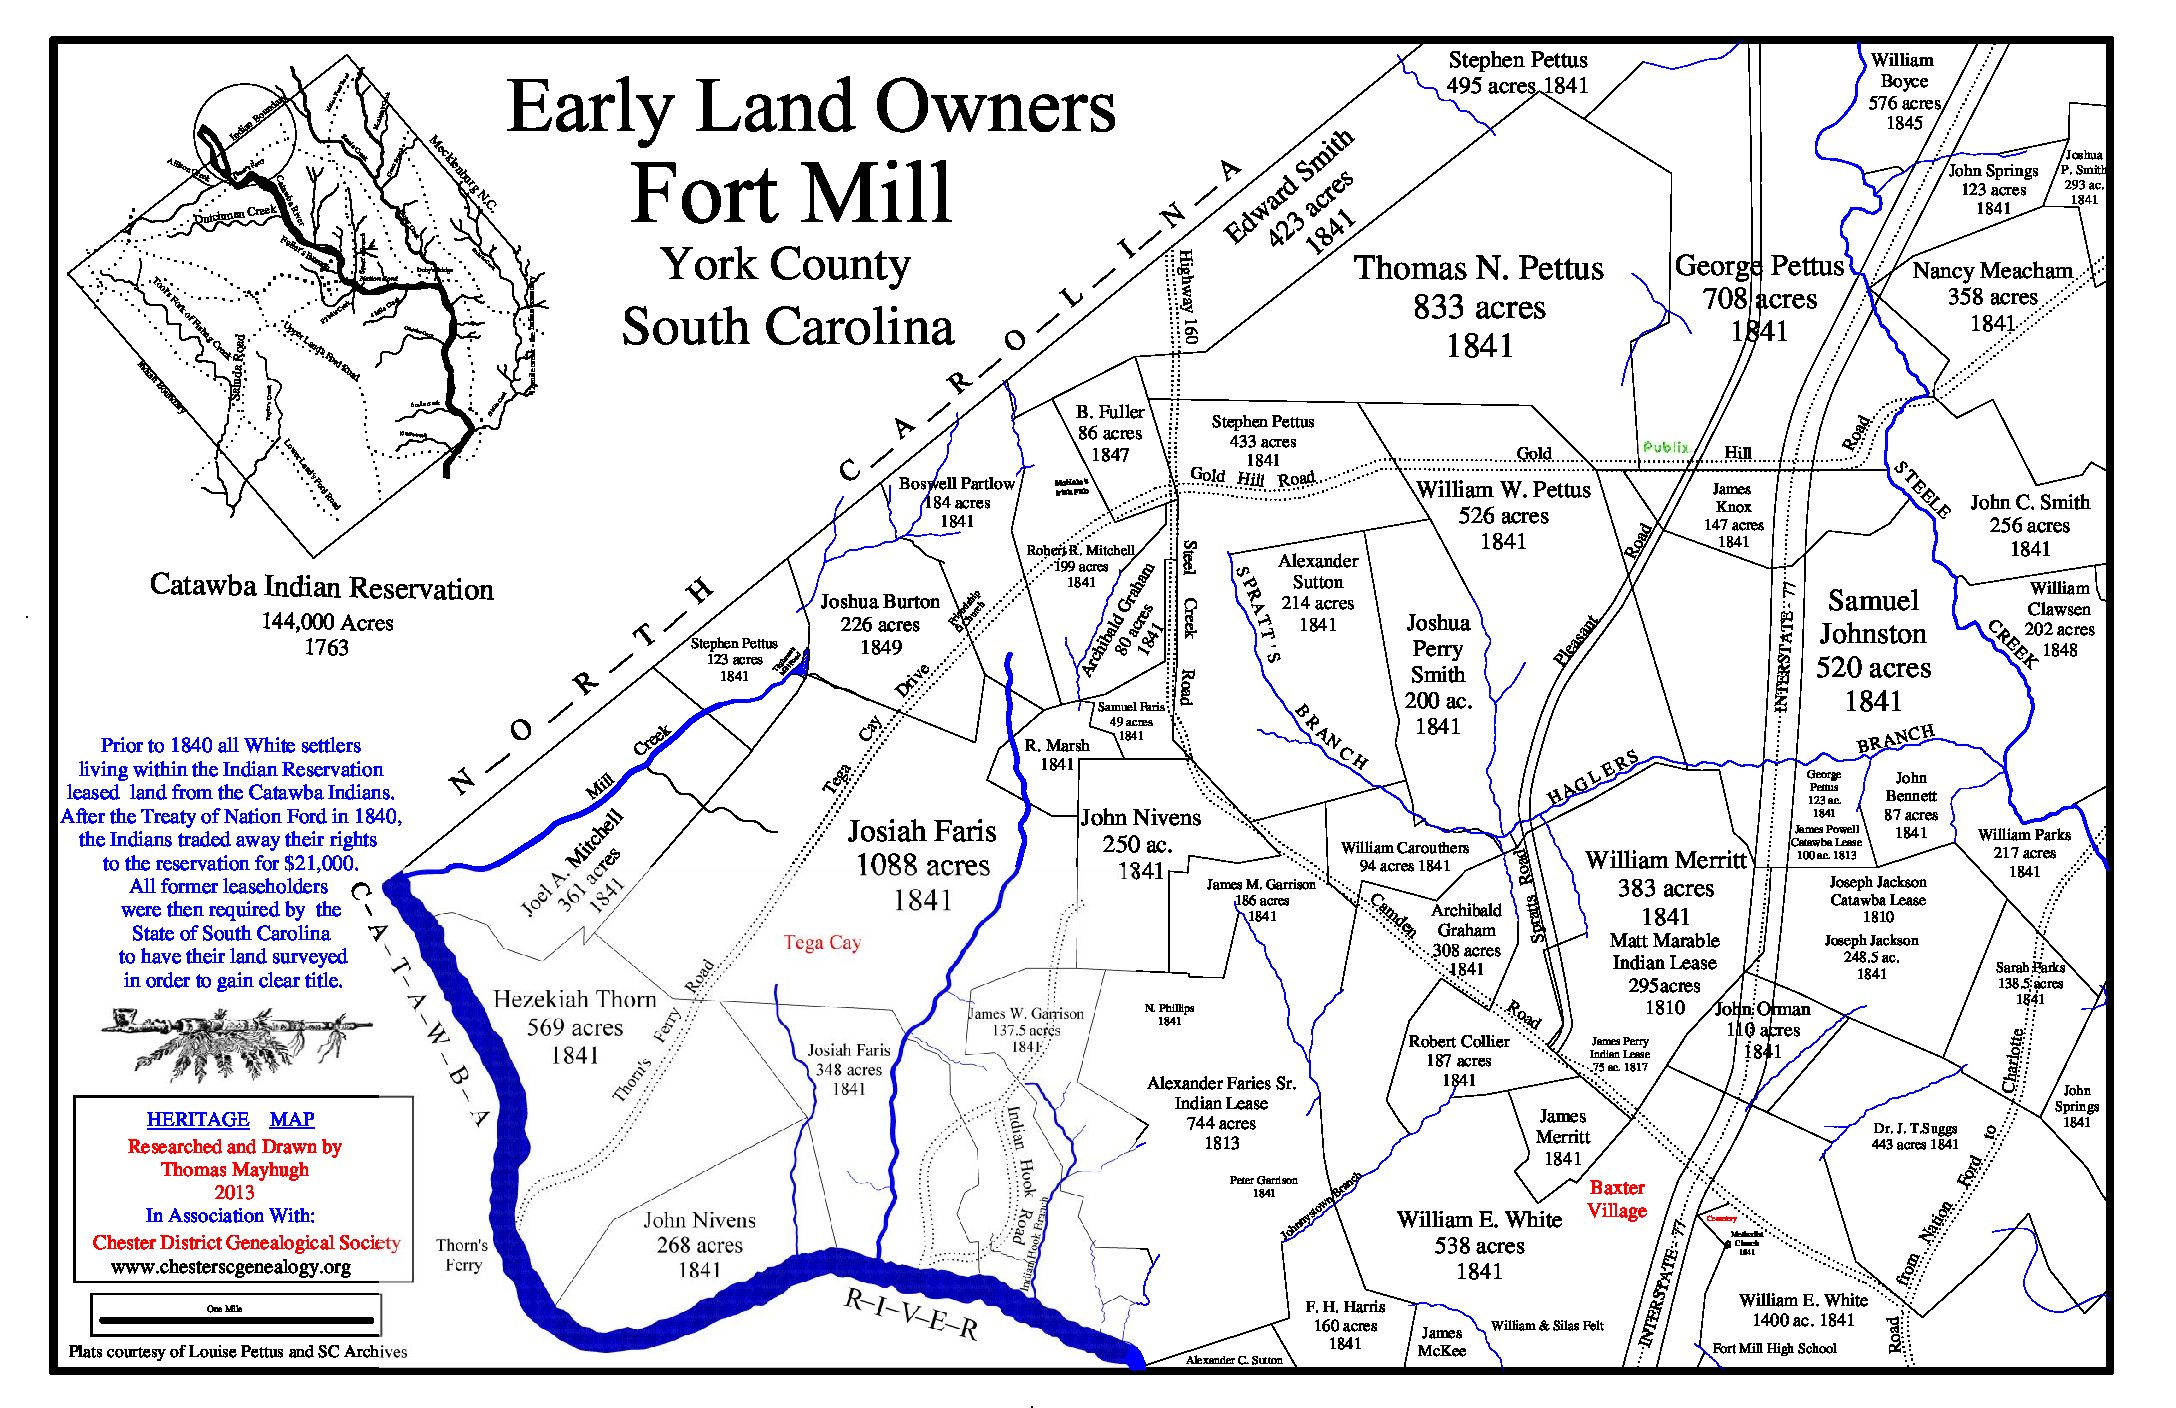 early-fort-mill-landowners-plat-mayhugh-heritage-maps-name-index